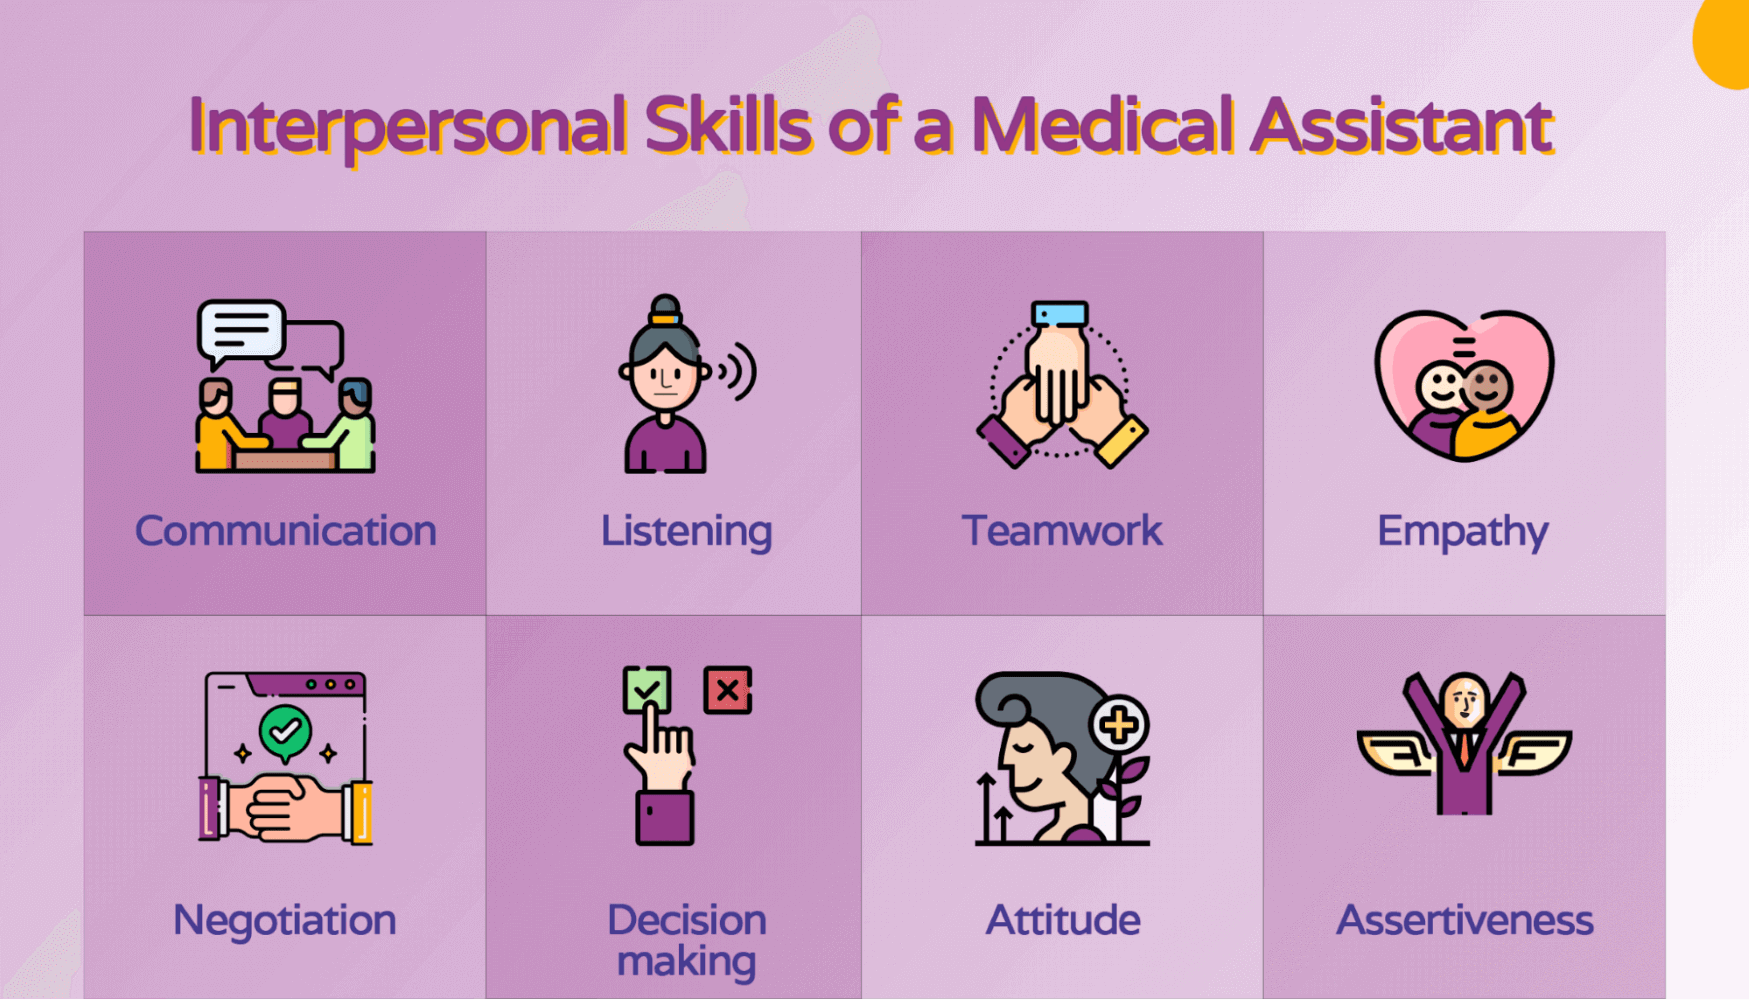 List of interpersonal skills of a medical assistant